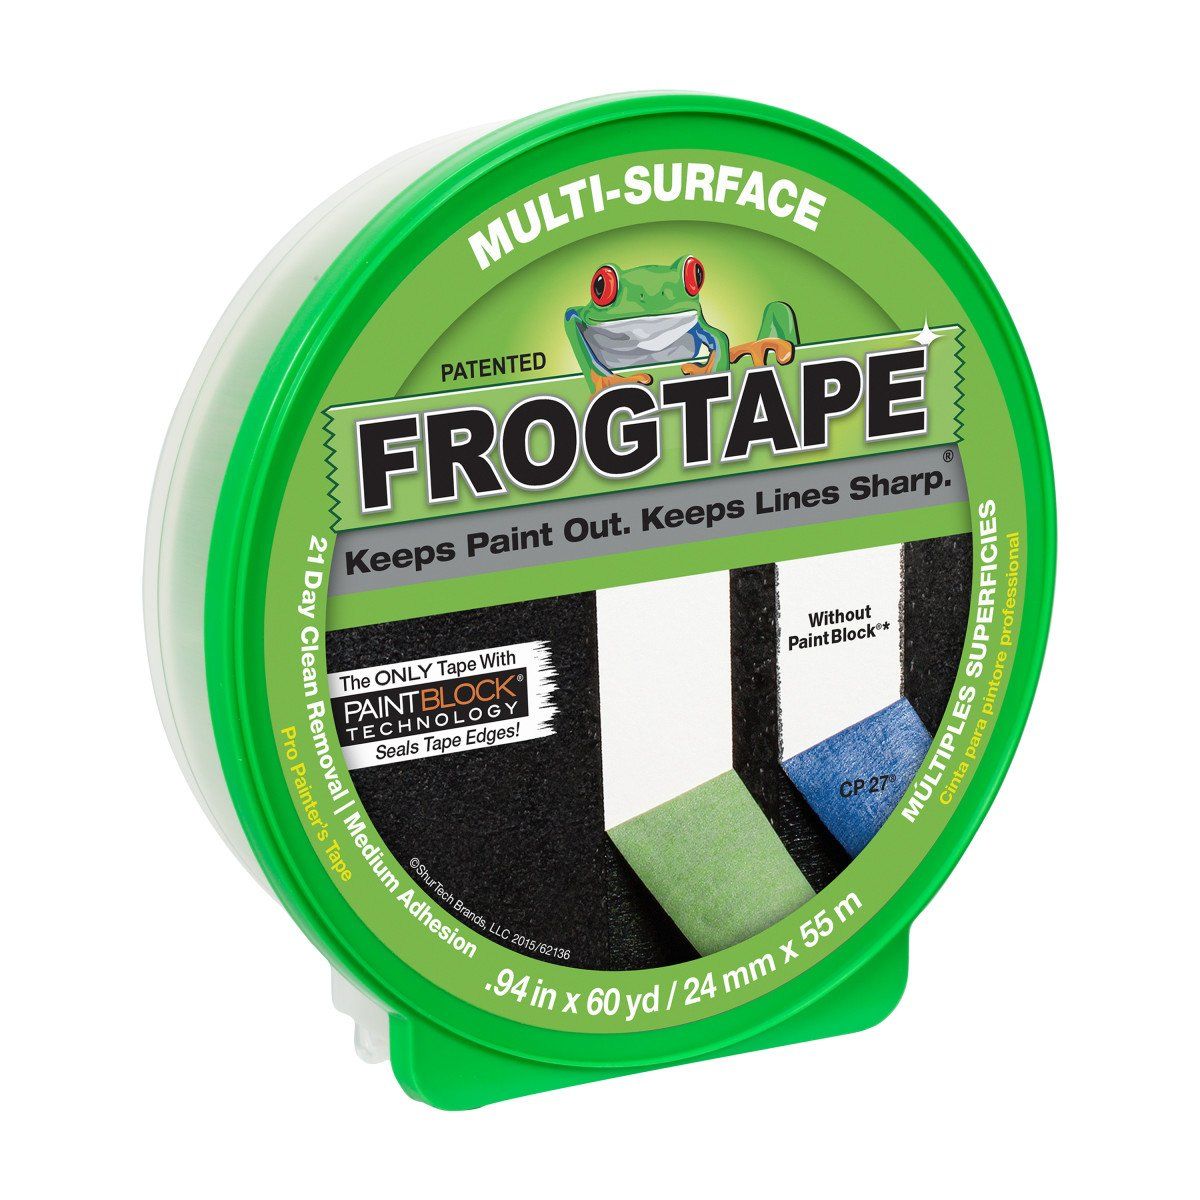 FROGTAPE 1358463 Multi-Surface Painter's Tape with PAINTBLOCK, Medium Adhesion, 0.94" Wide x 60 Yard | Amazon (US)